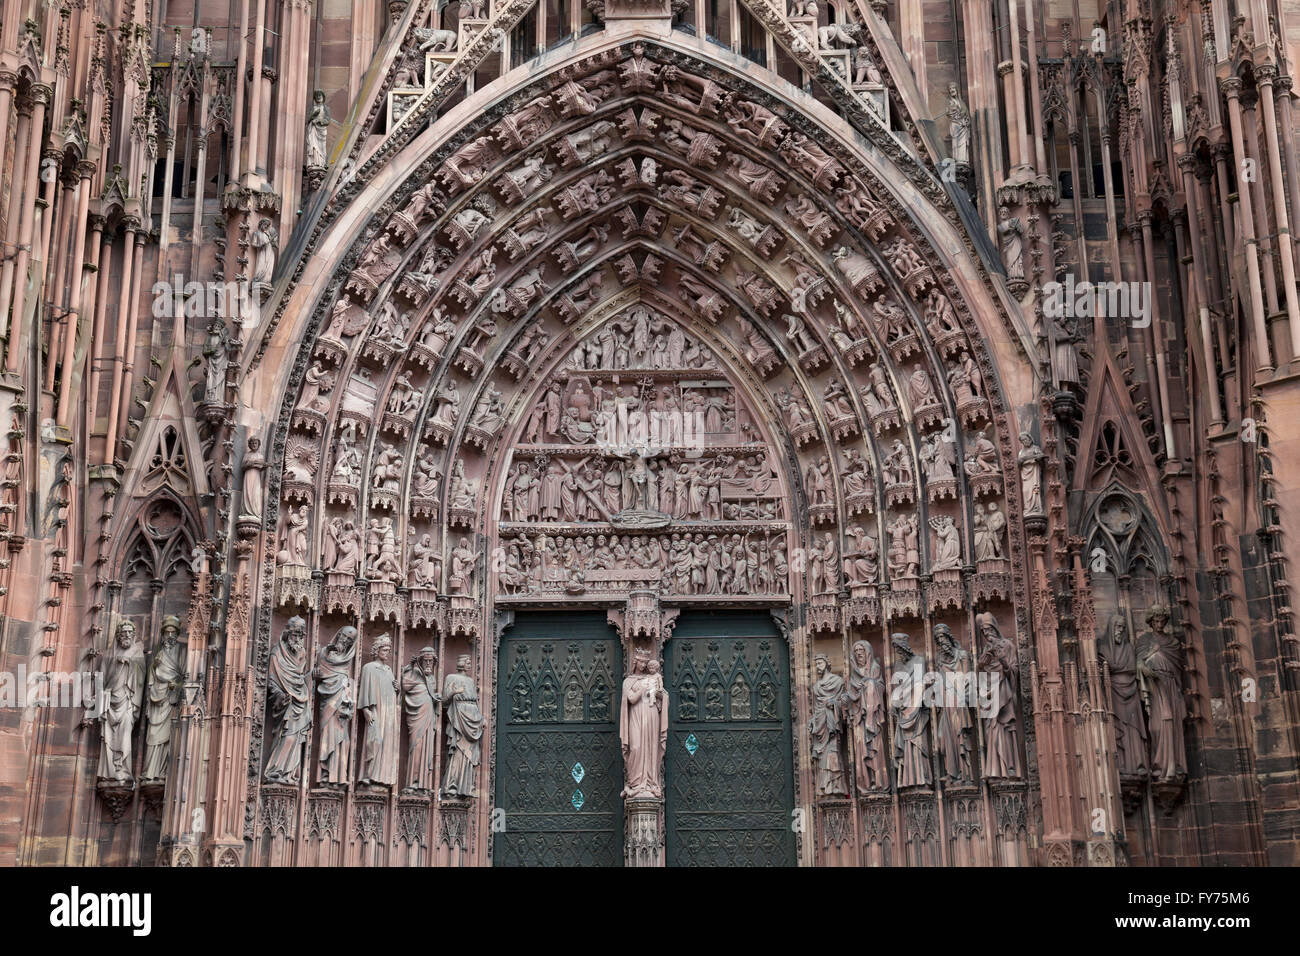 Main portal of the west facade, Strasbourg Cathedral, Strasbourg, Alsace, France Stock Photo